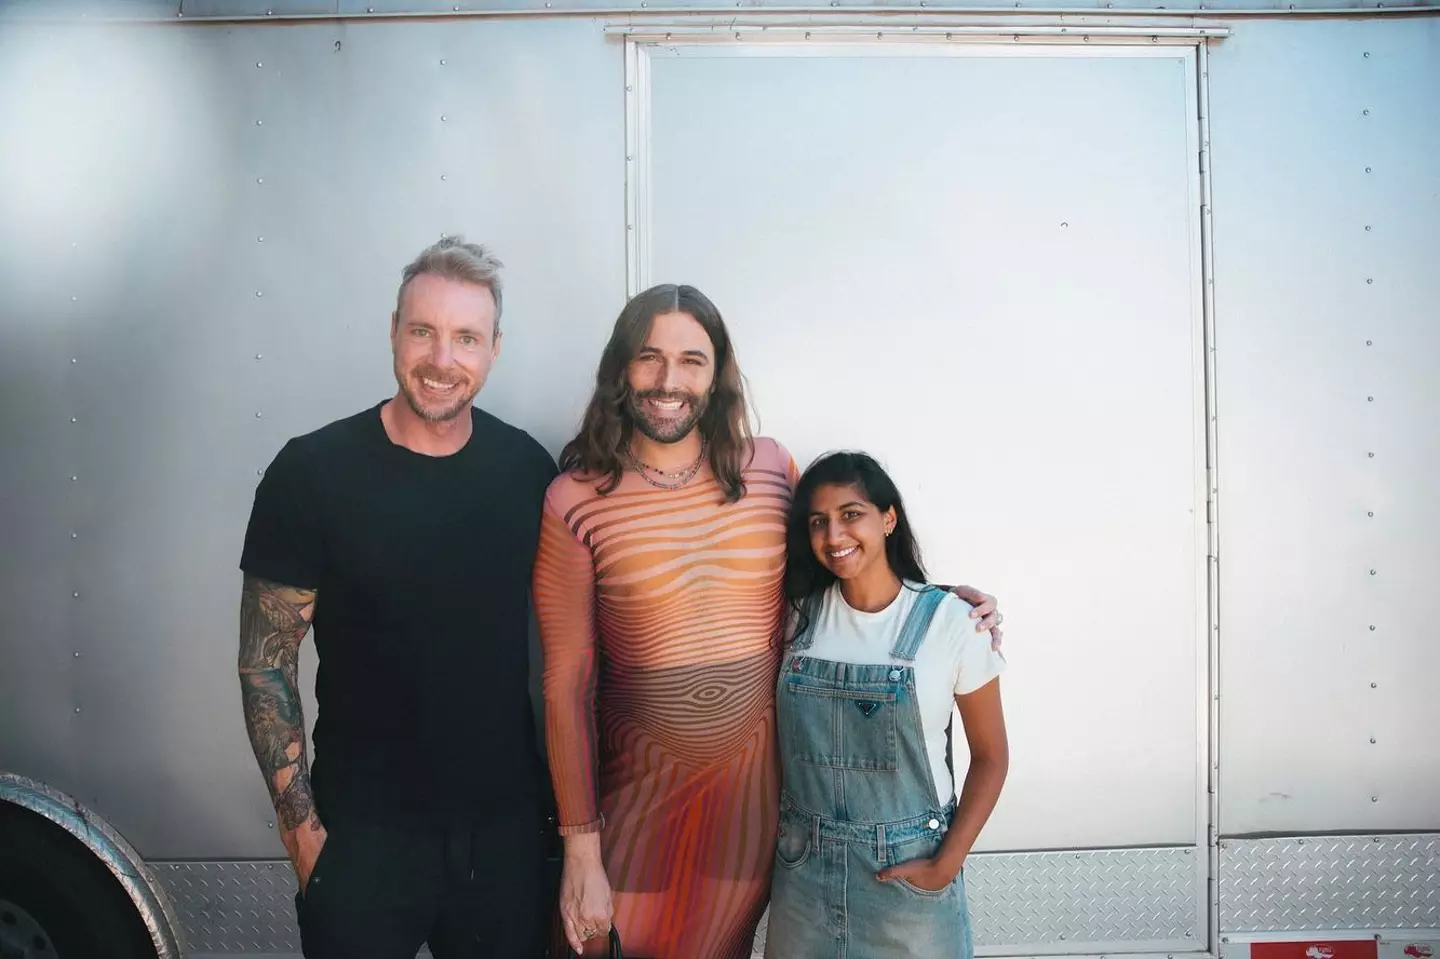 Jonathan Van Ness recently featured on the Armchair Expert podcast with Dax Shepard and Monica Padman.